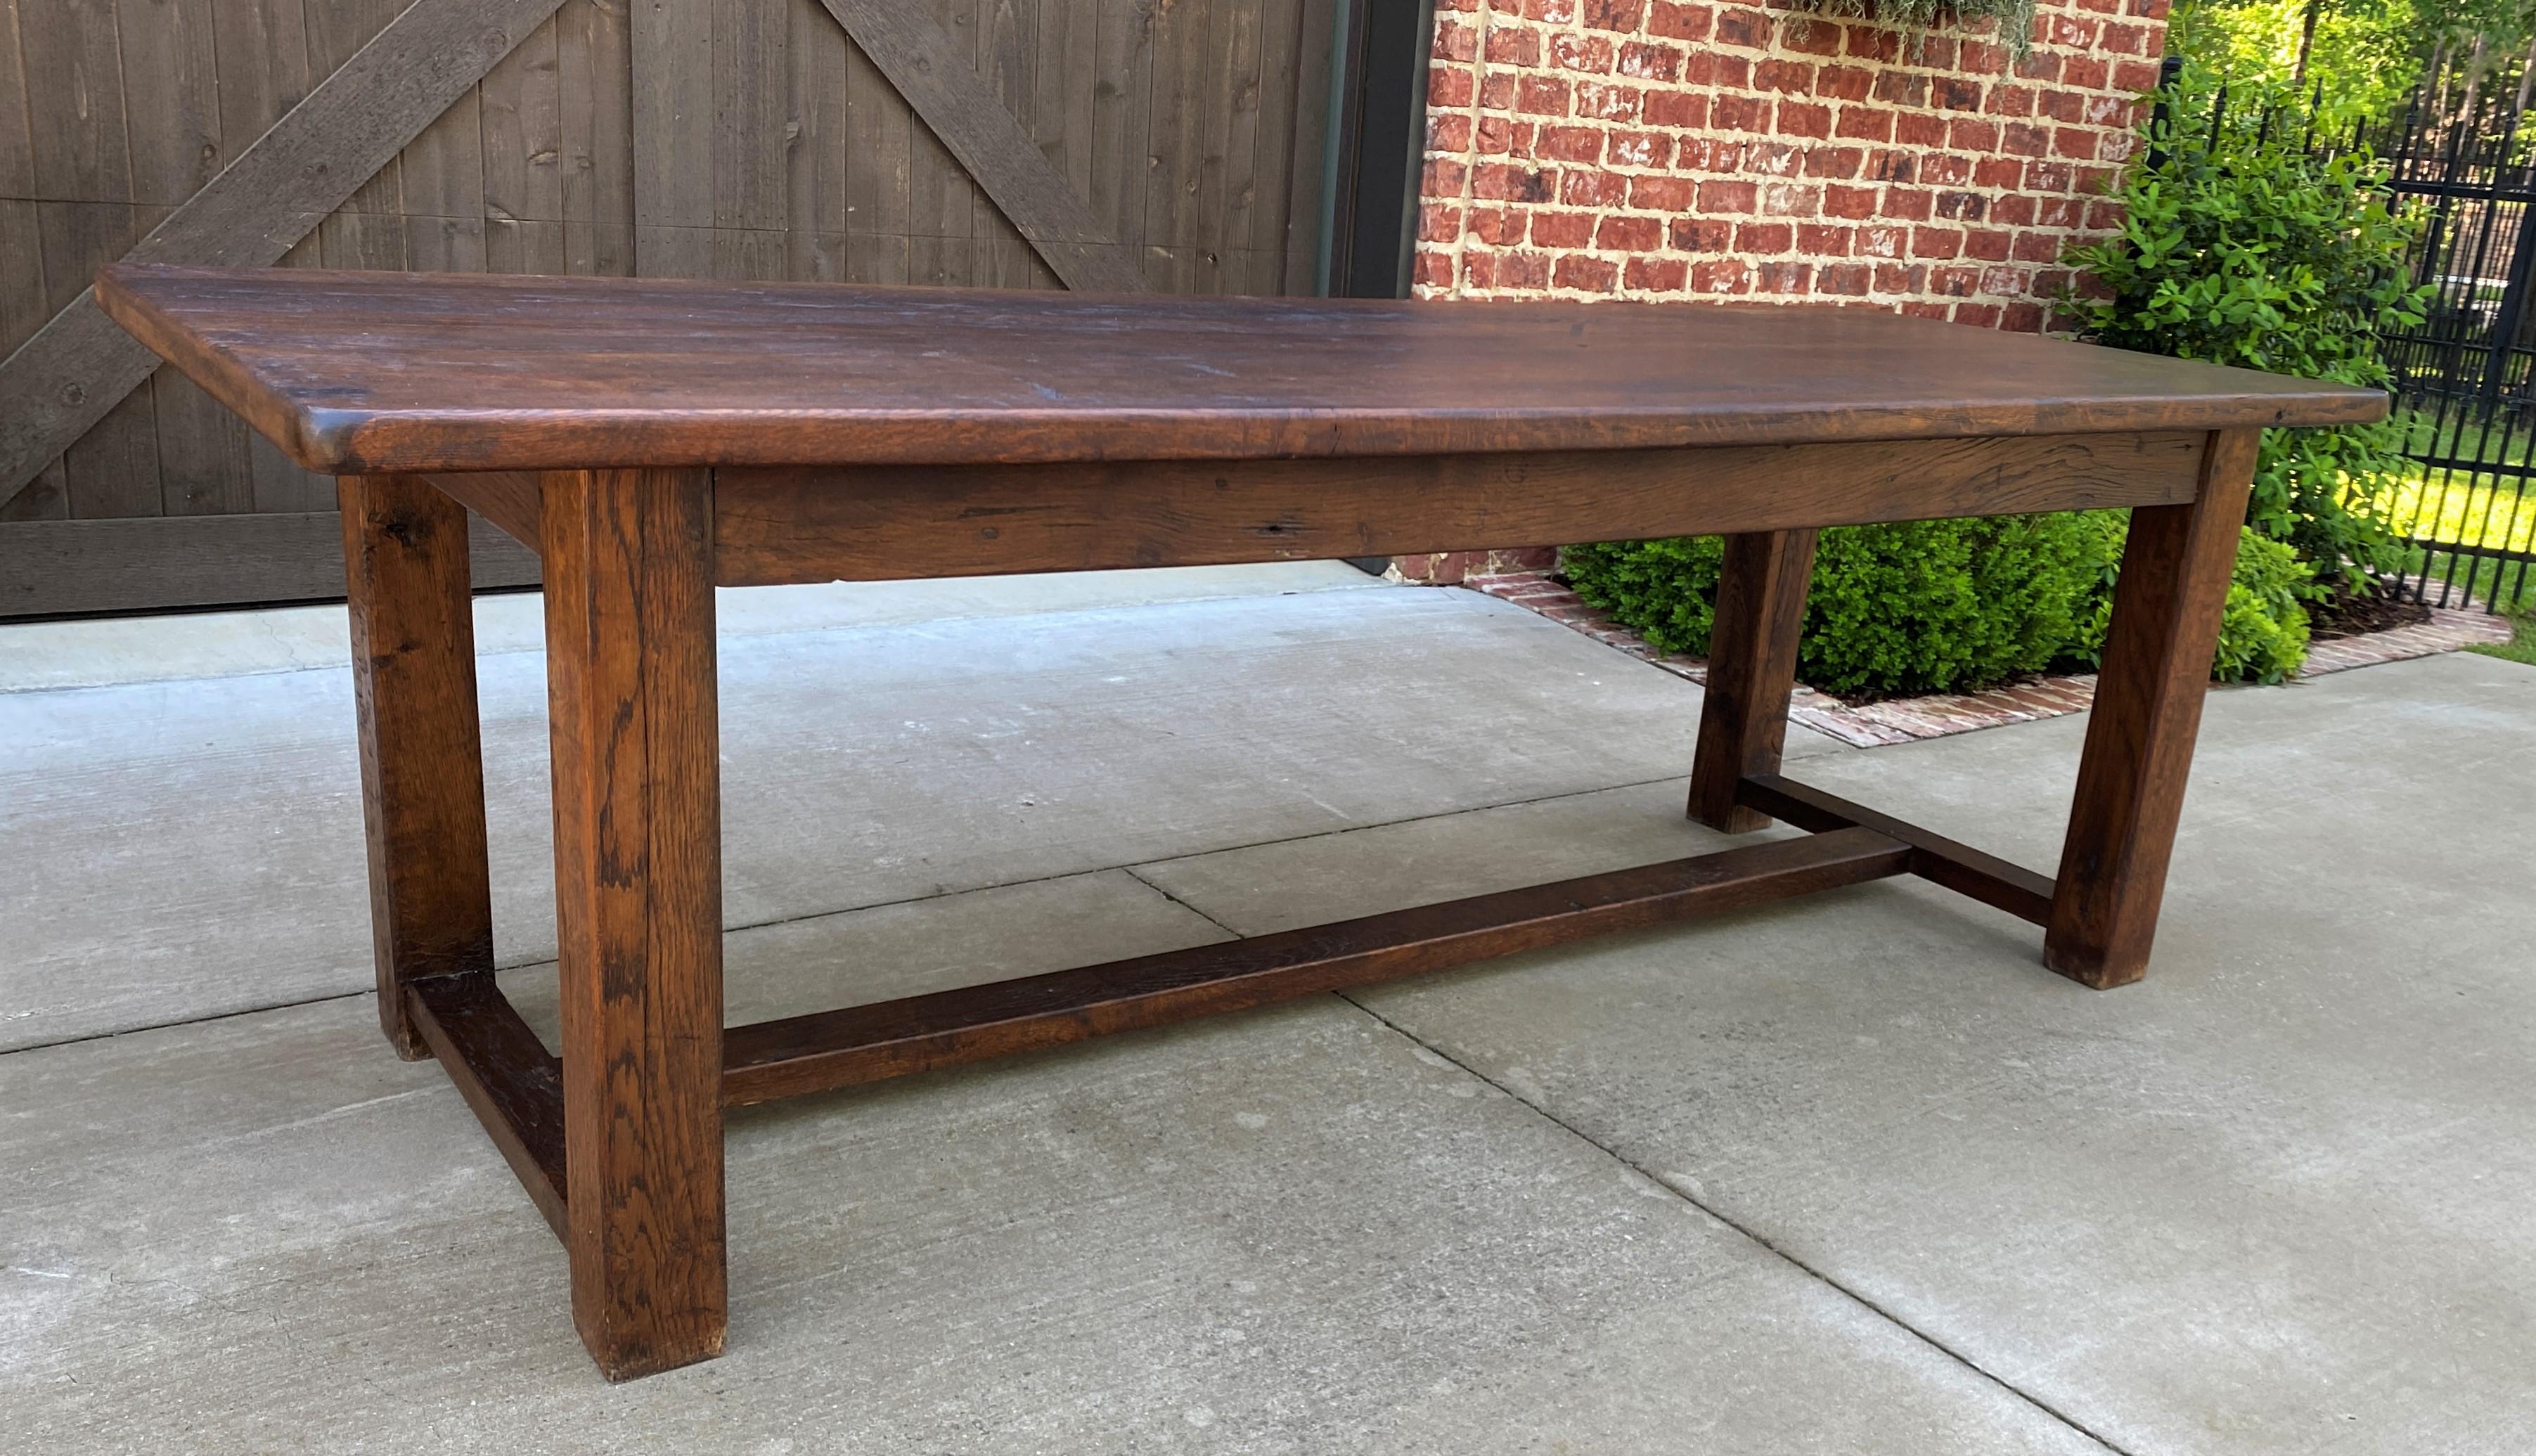 French Provincial Antique French Farm Table Dining Library Table Desk Farmhouse Oak Rustic 19C